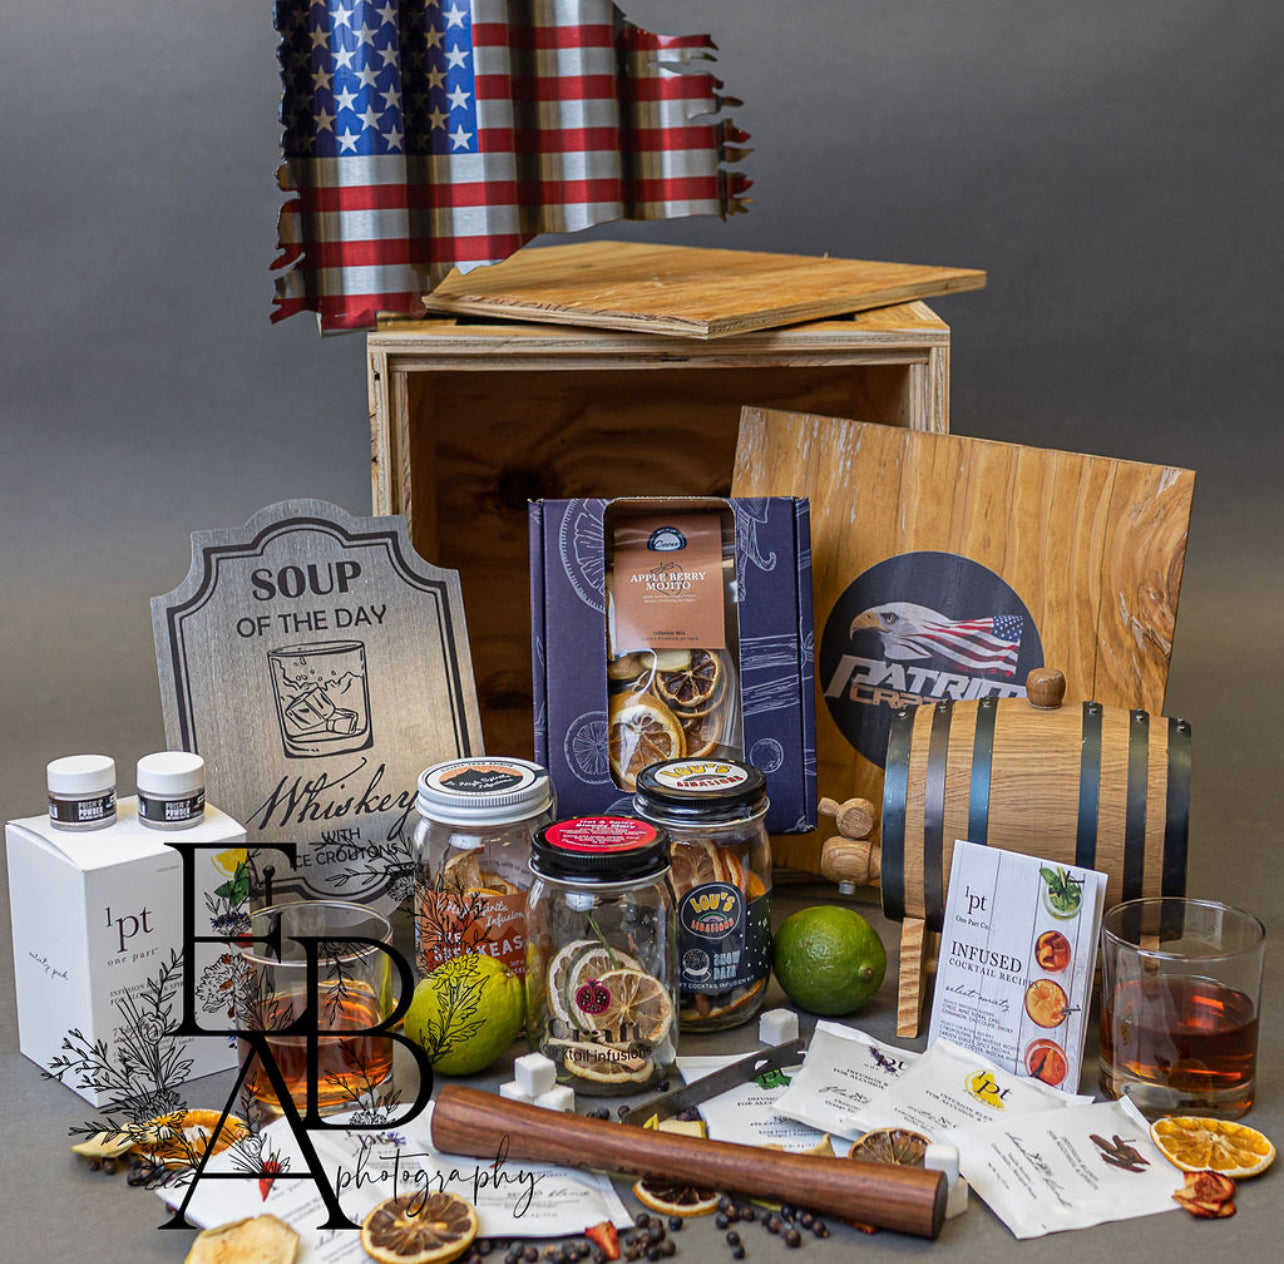 Make Your Own Whiskey Crate – Patriot Crates